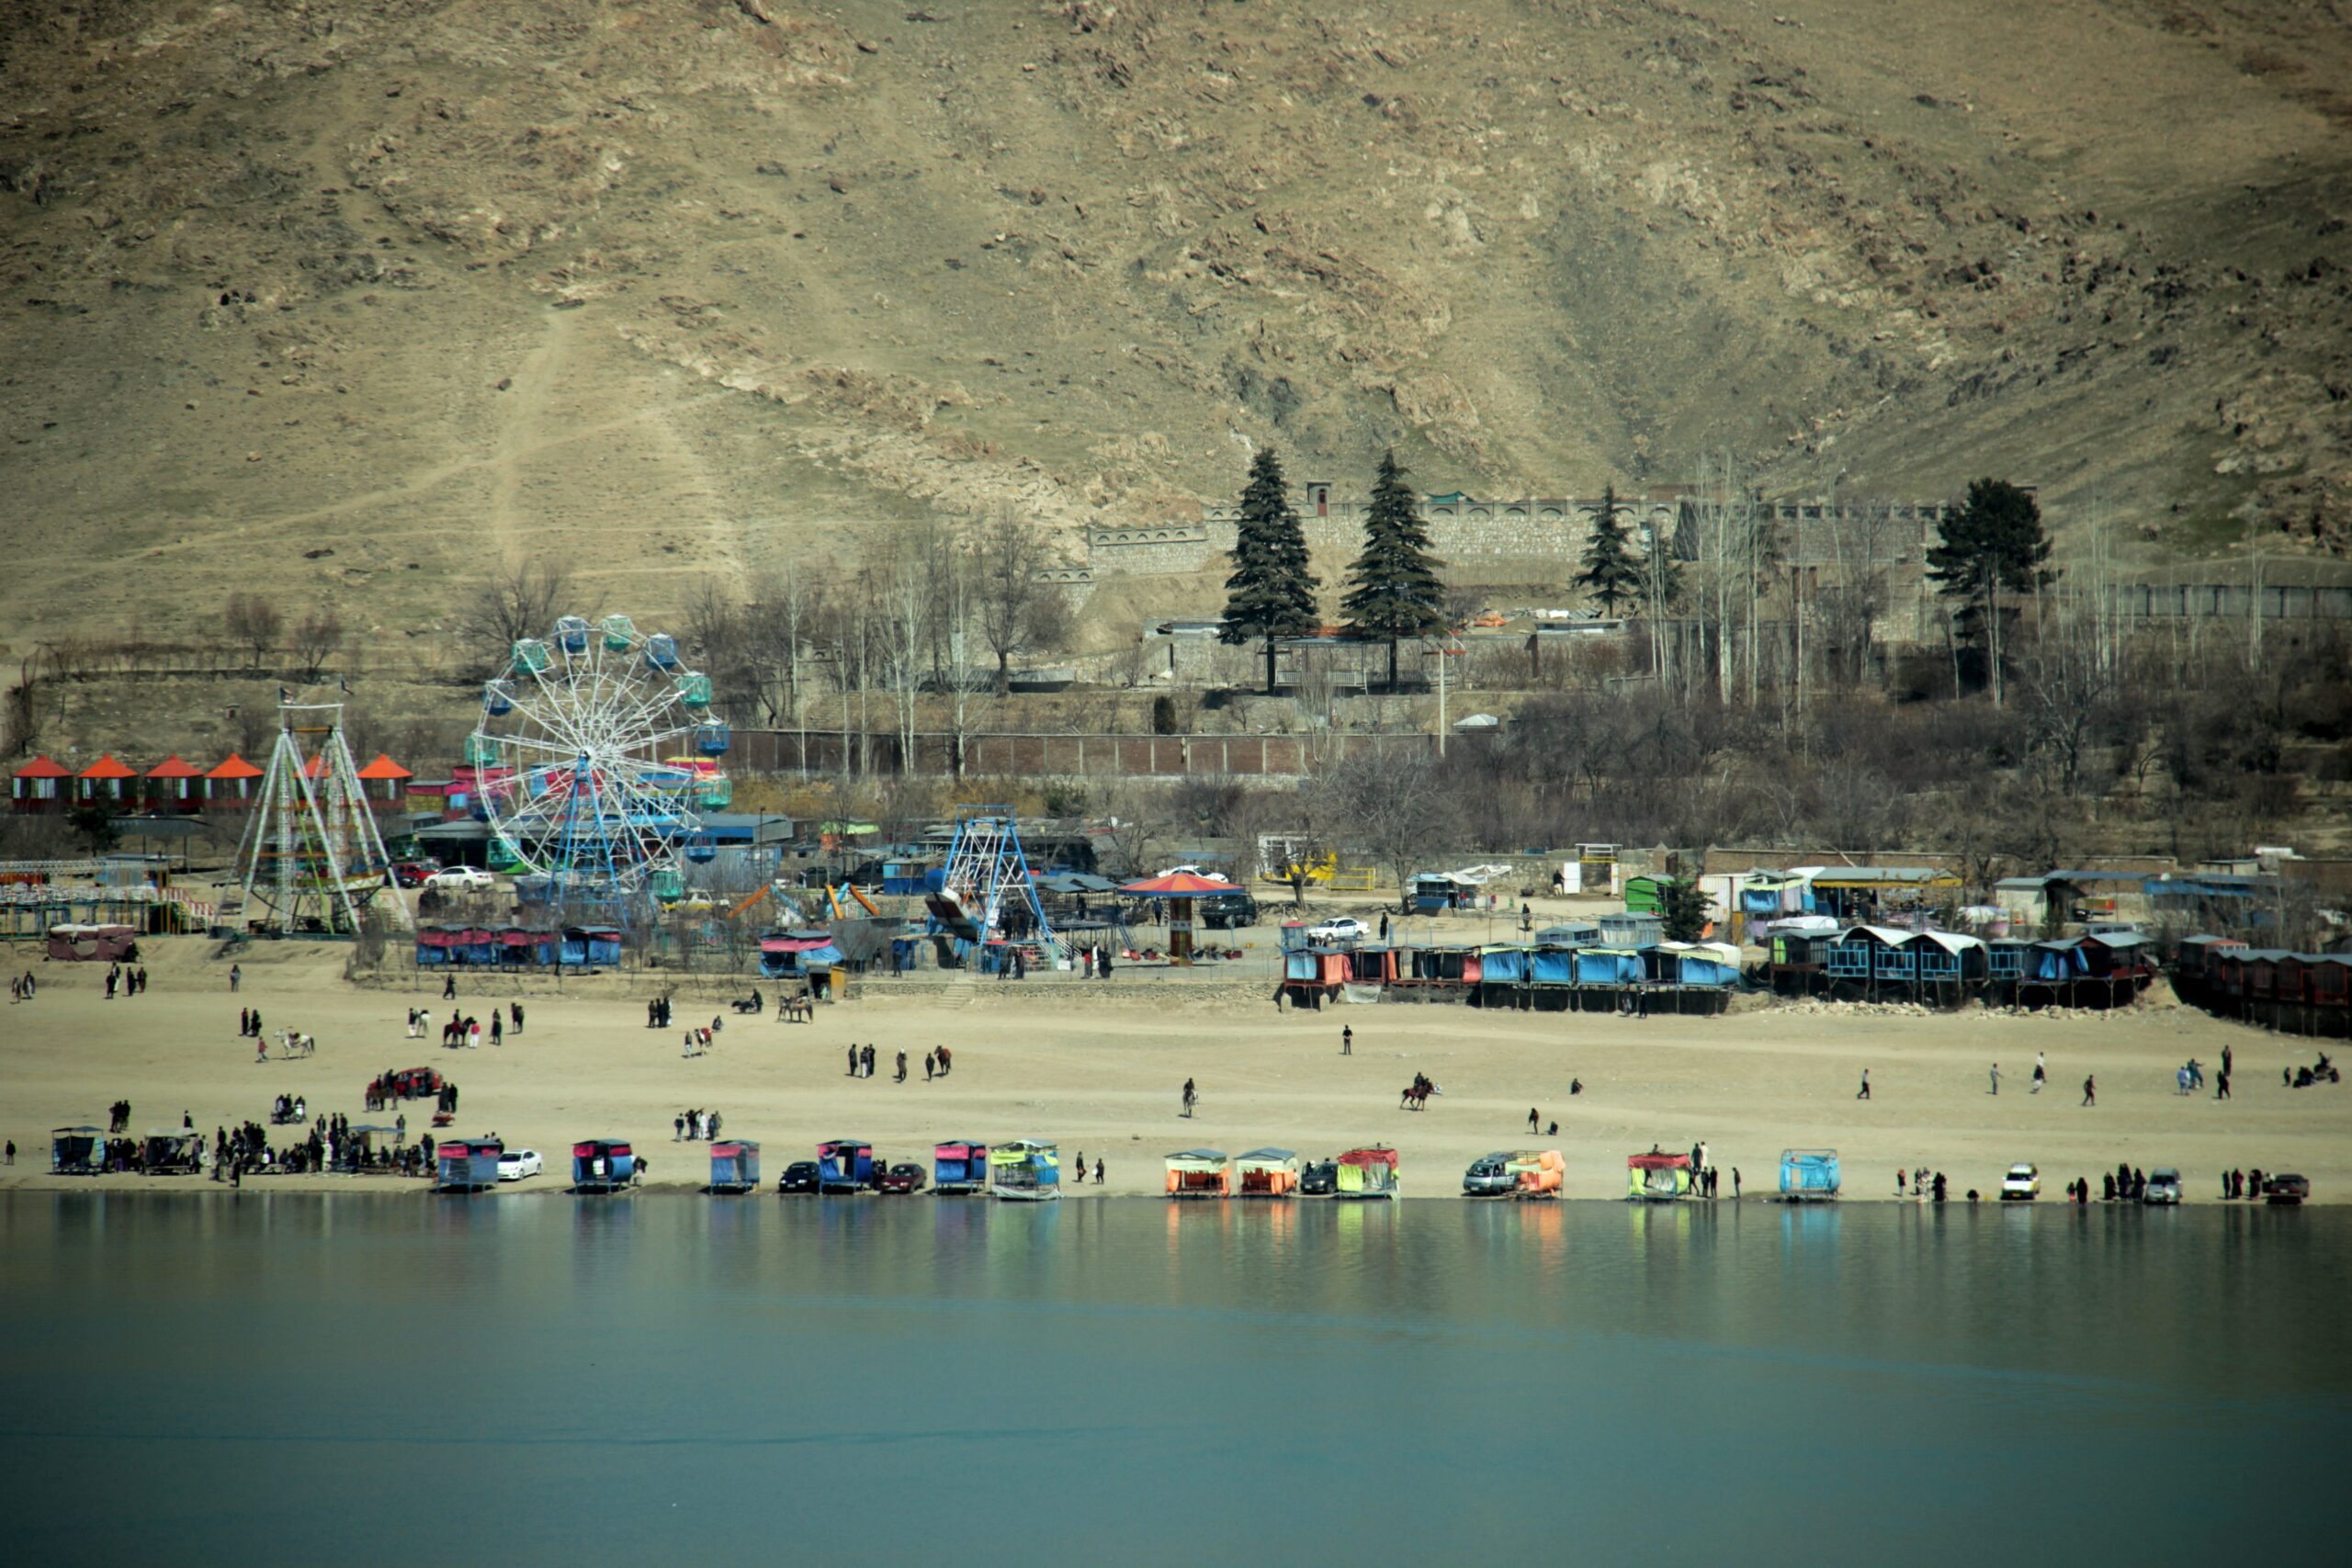 Photograph of colorful ferris wheel and boats alongside a barren mountain. There is lake water in the foreground.